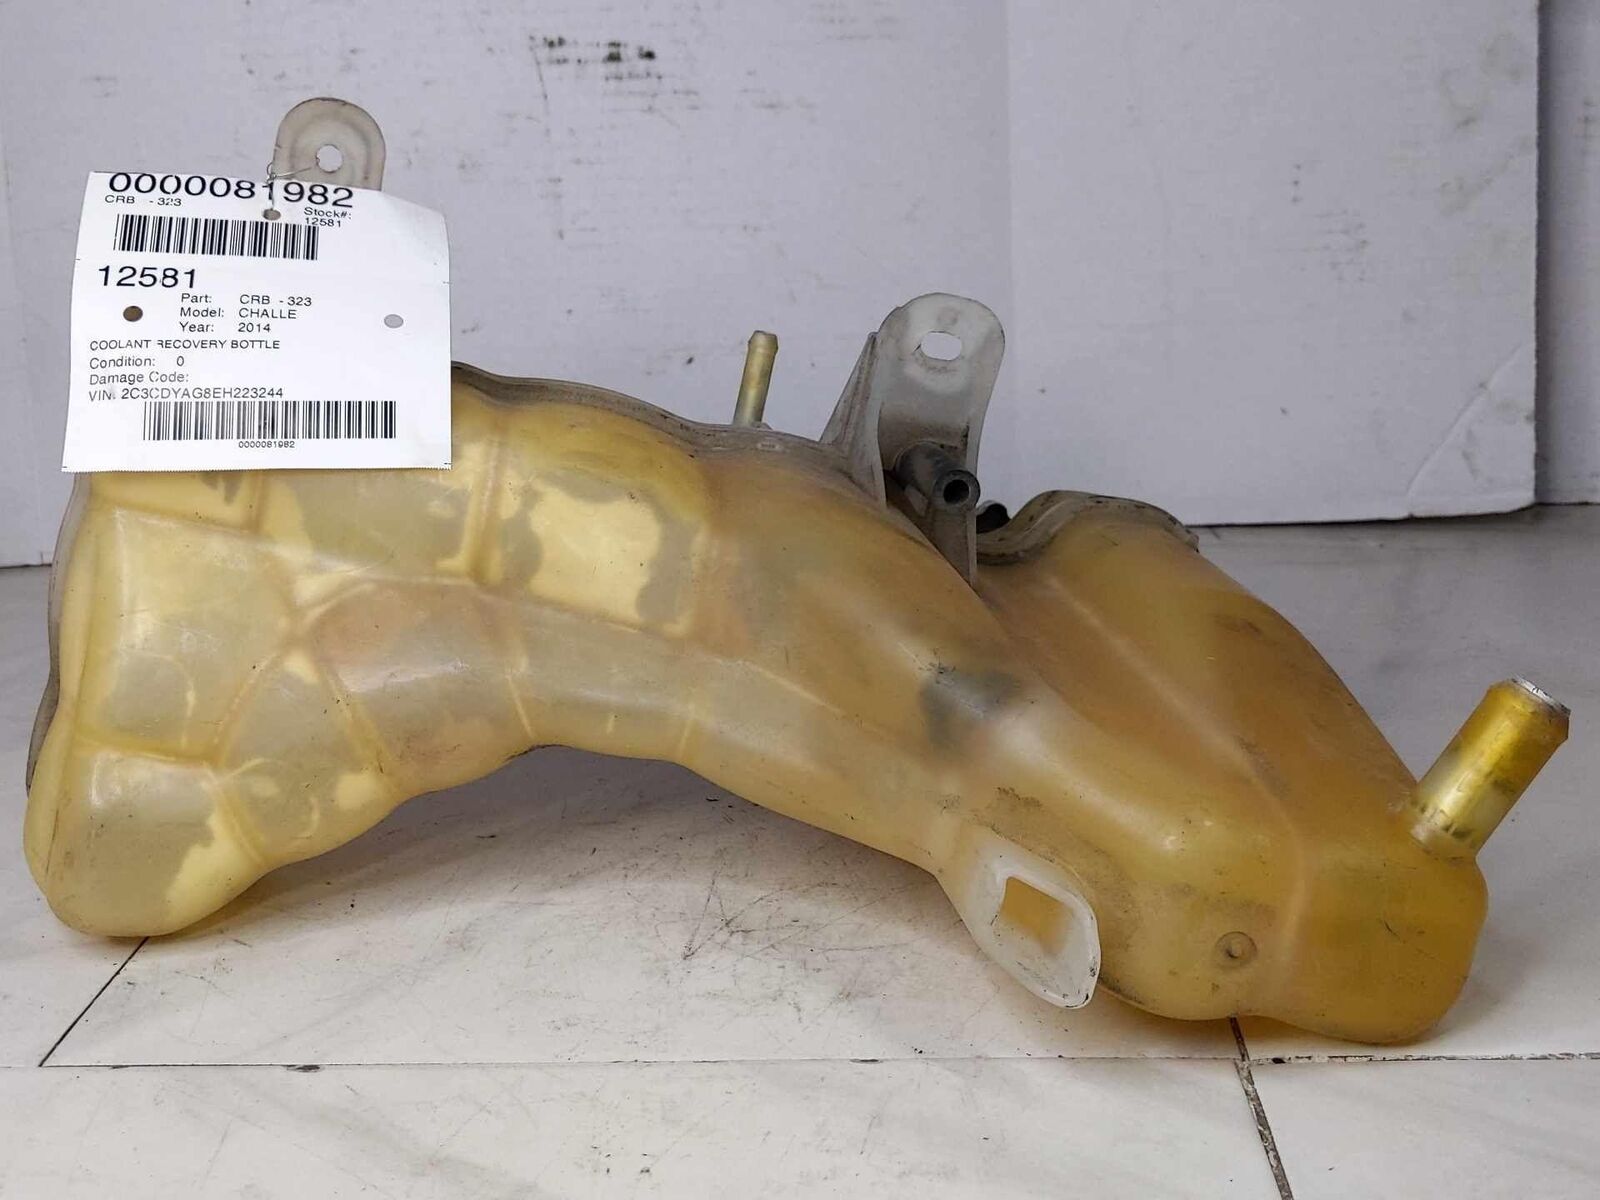 Coolant Recovery Bottle OEM DODGE CHALLENGER 11 12 13 14 15 16 17 18 19 20 21 22